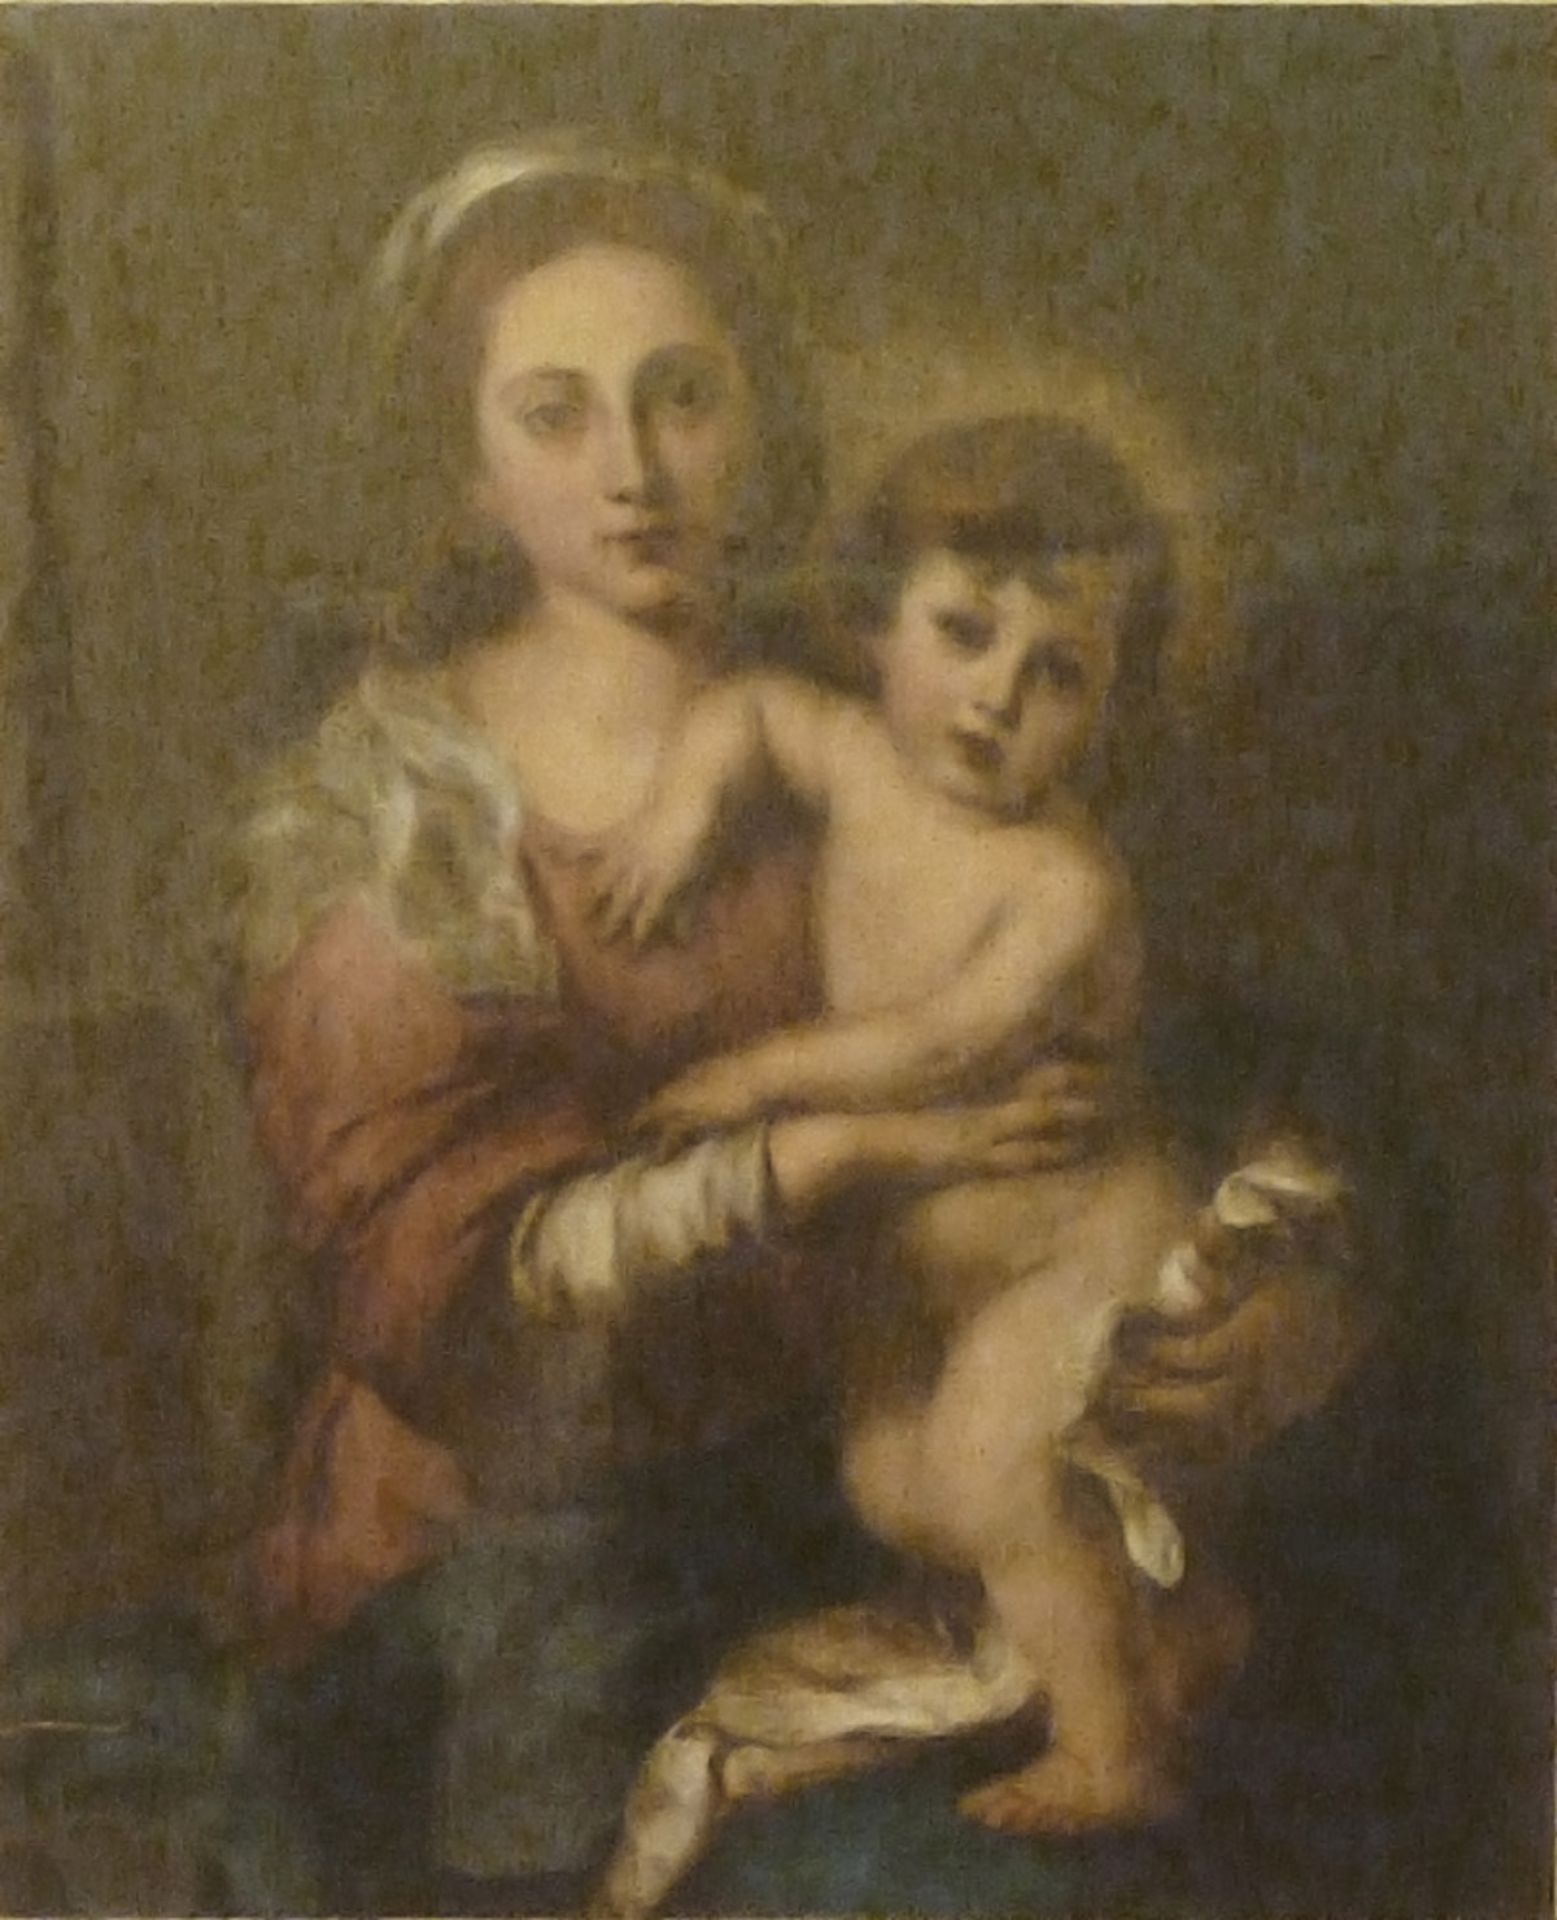 ENGRAVER early 20TH CENTURY Madonna with Child, after Murillo Color print, cm. 80 x 63 Subtitled